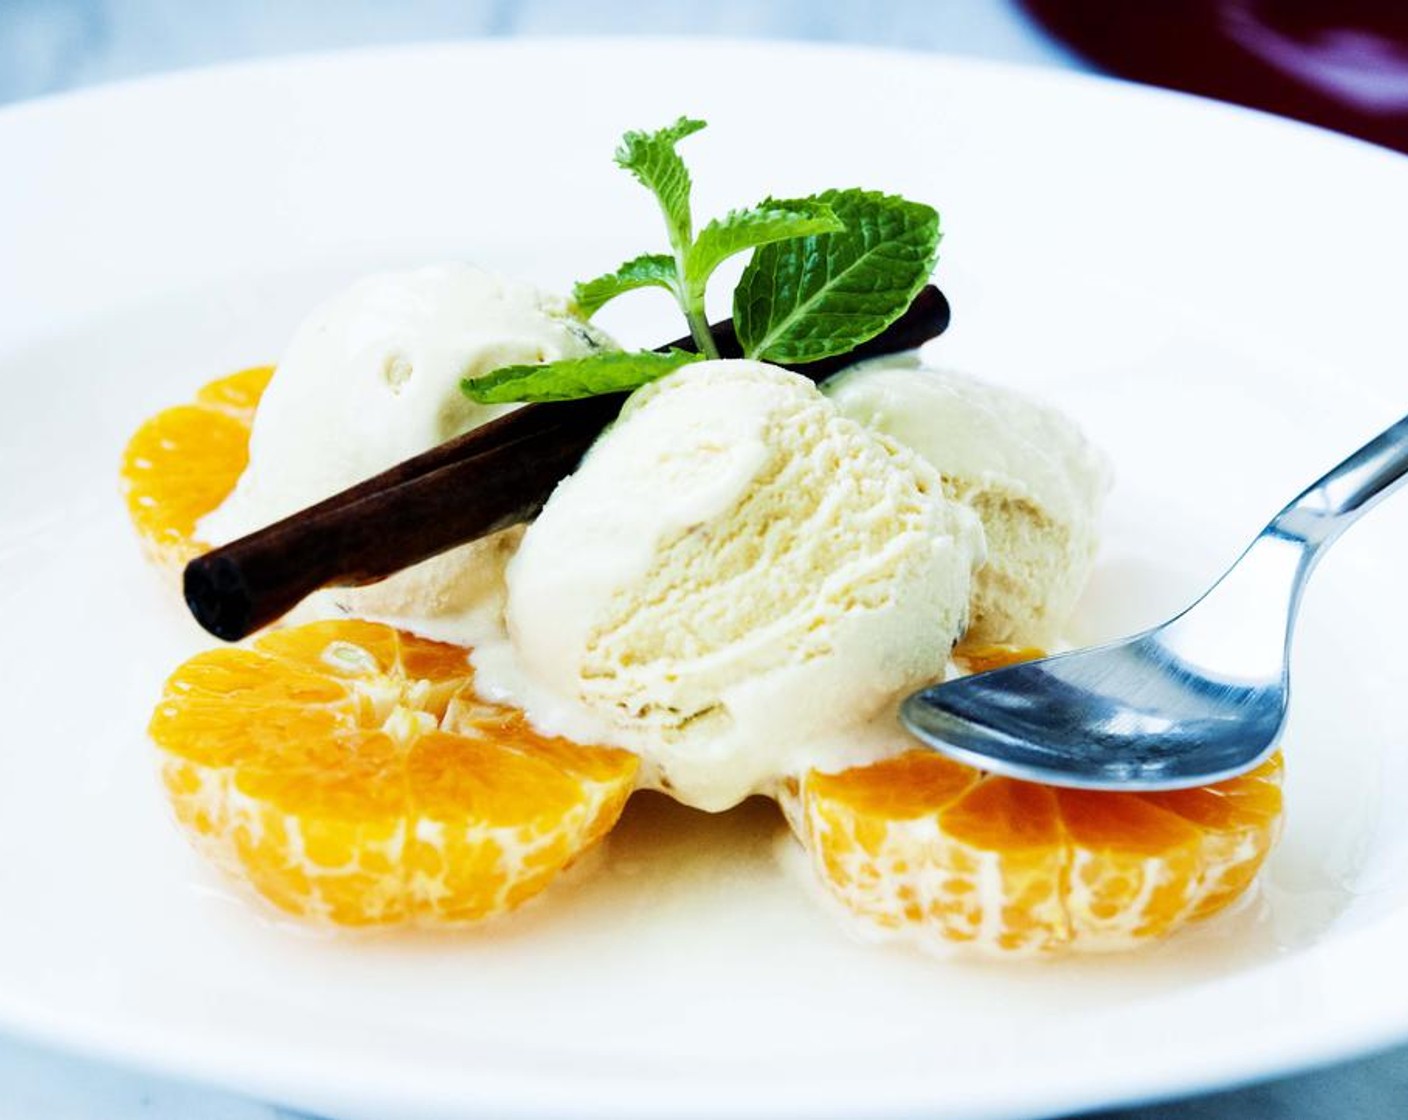 Vanilla Ice Cream with Clementines in Cinnamon Syrup